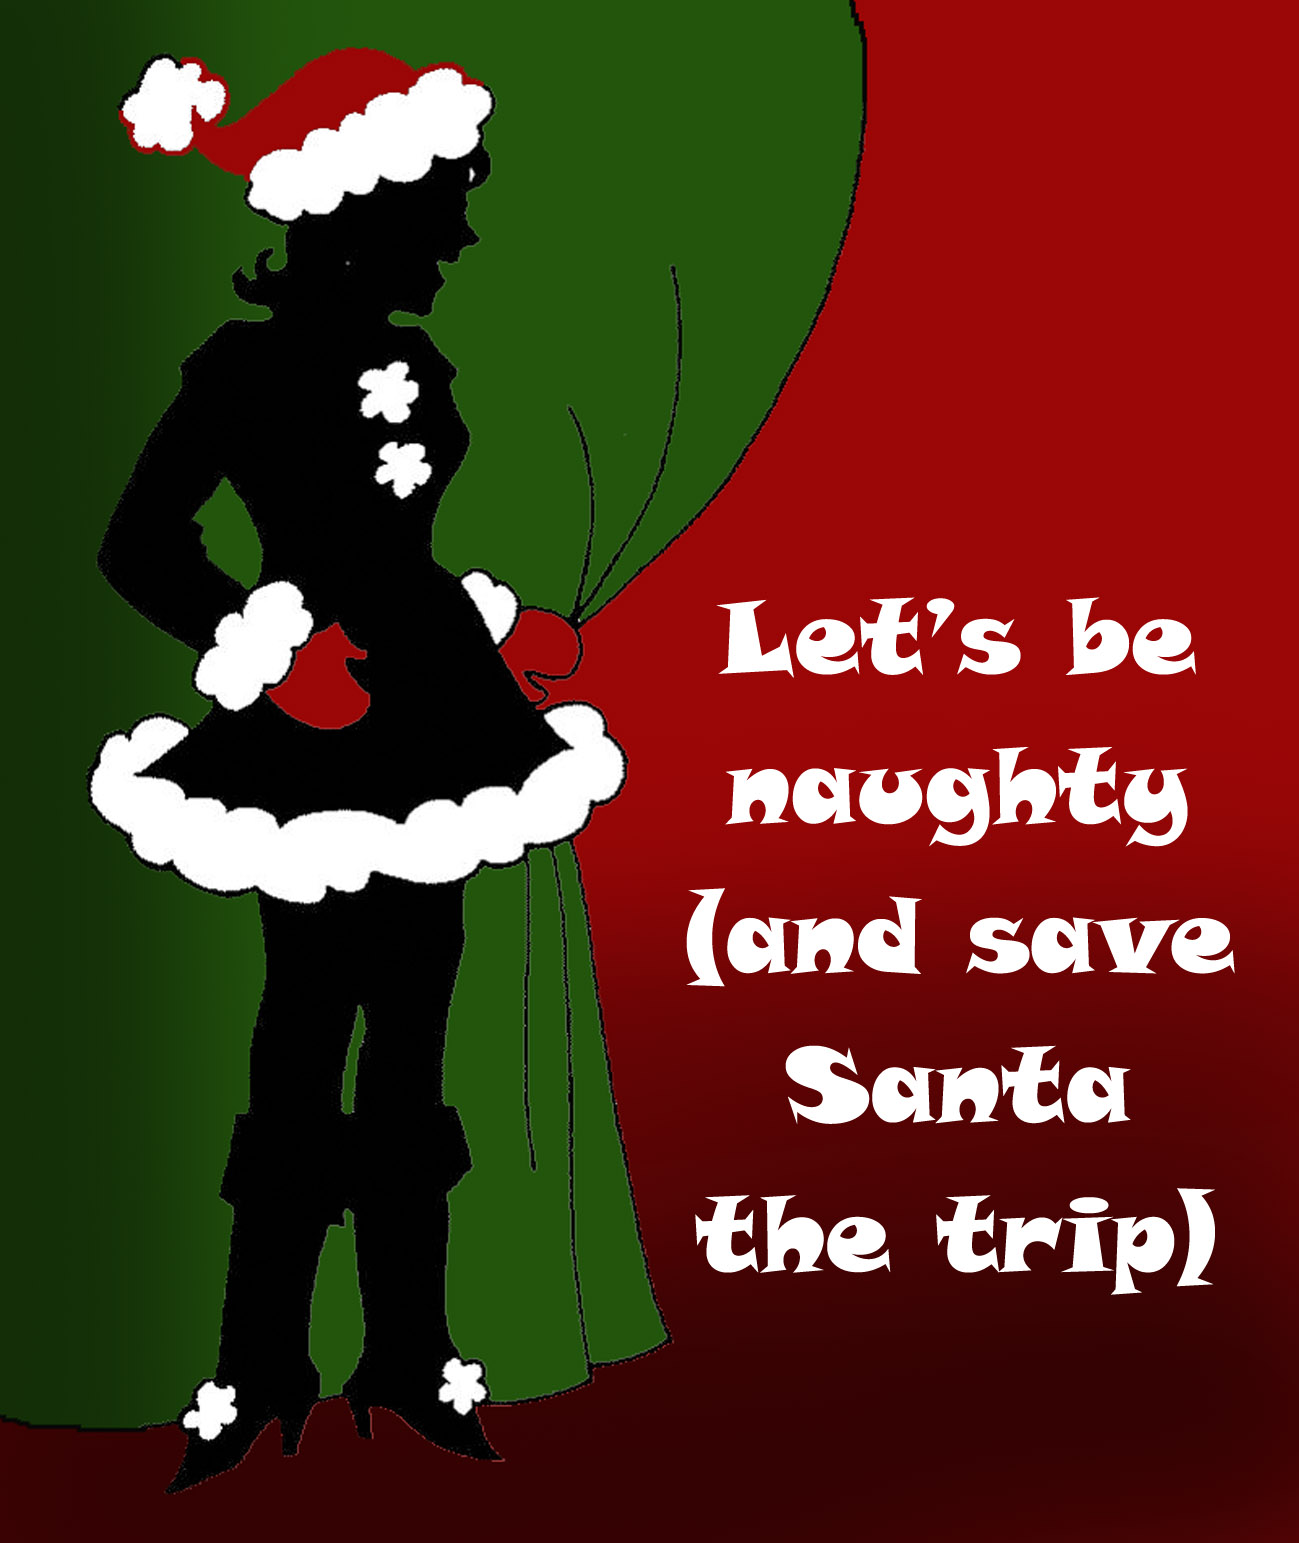 Funny Christmas saying with Christmas girl in silhouette: Let's be naughty and save santa the trip.